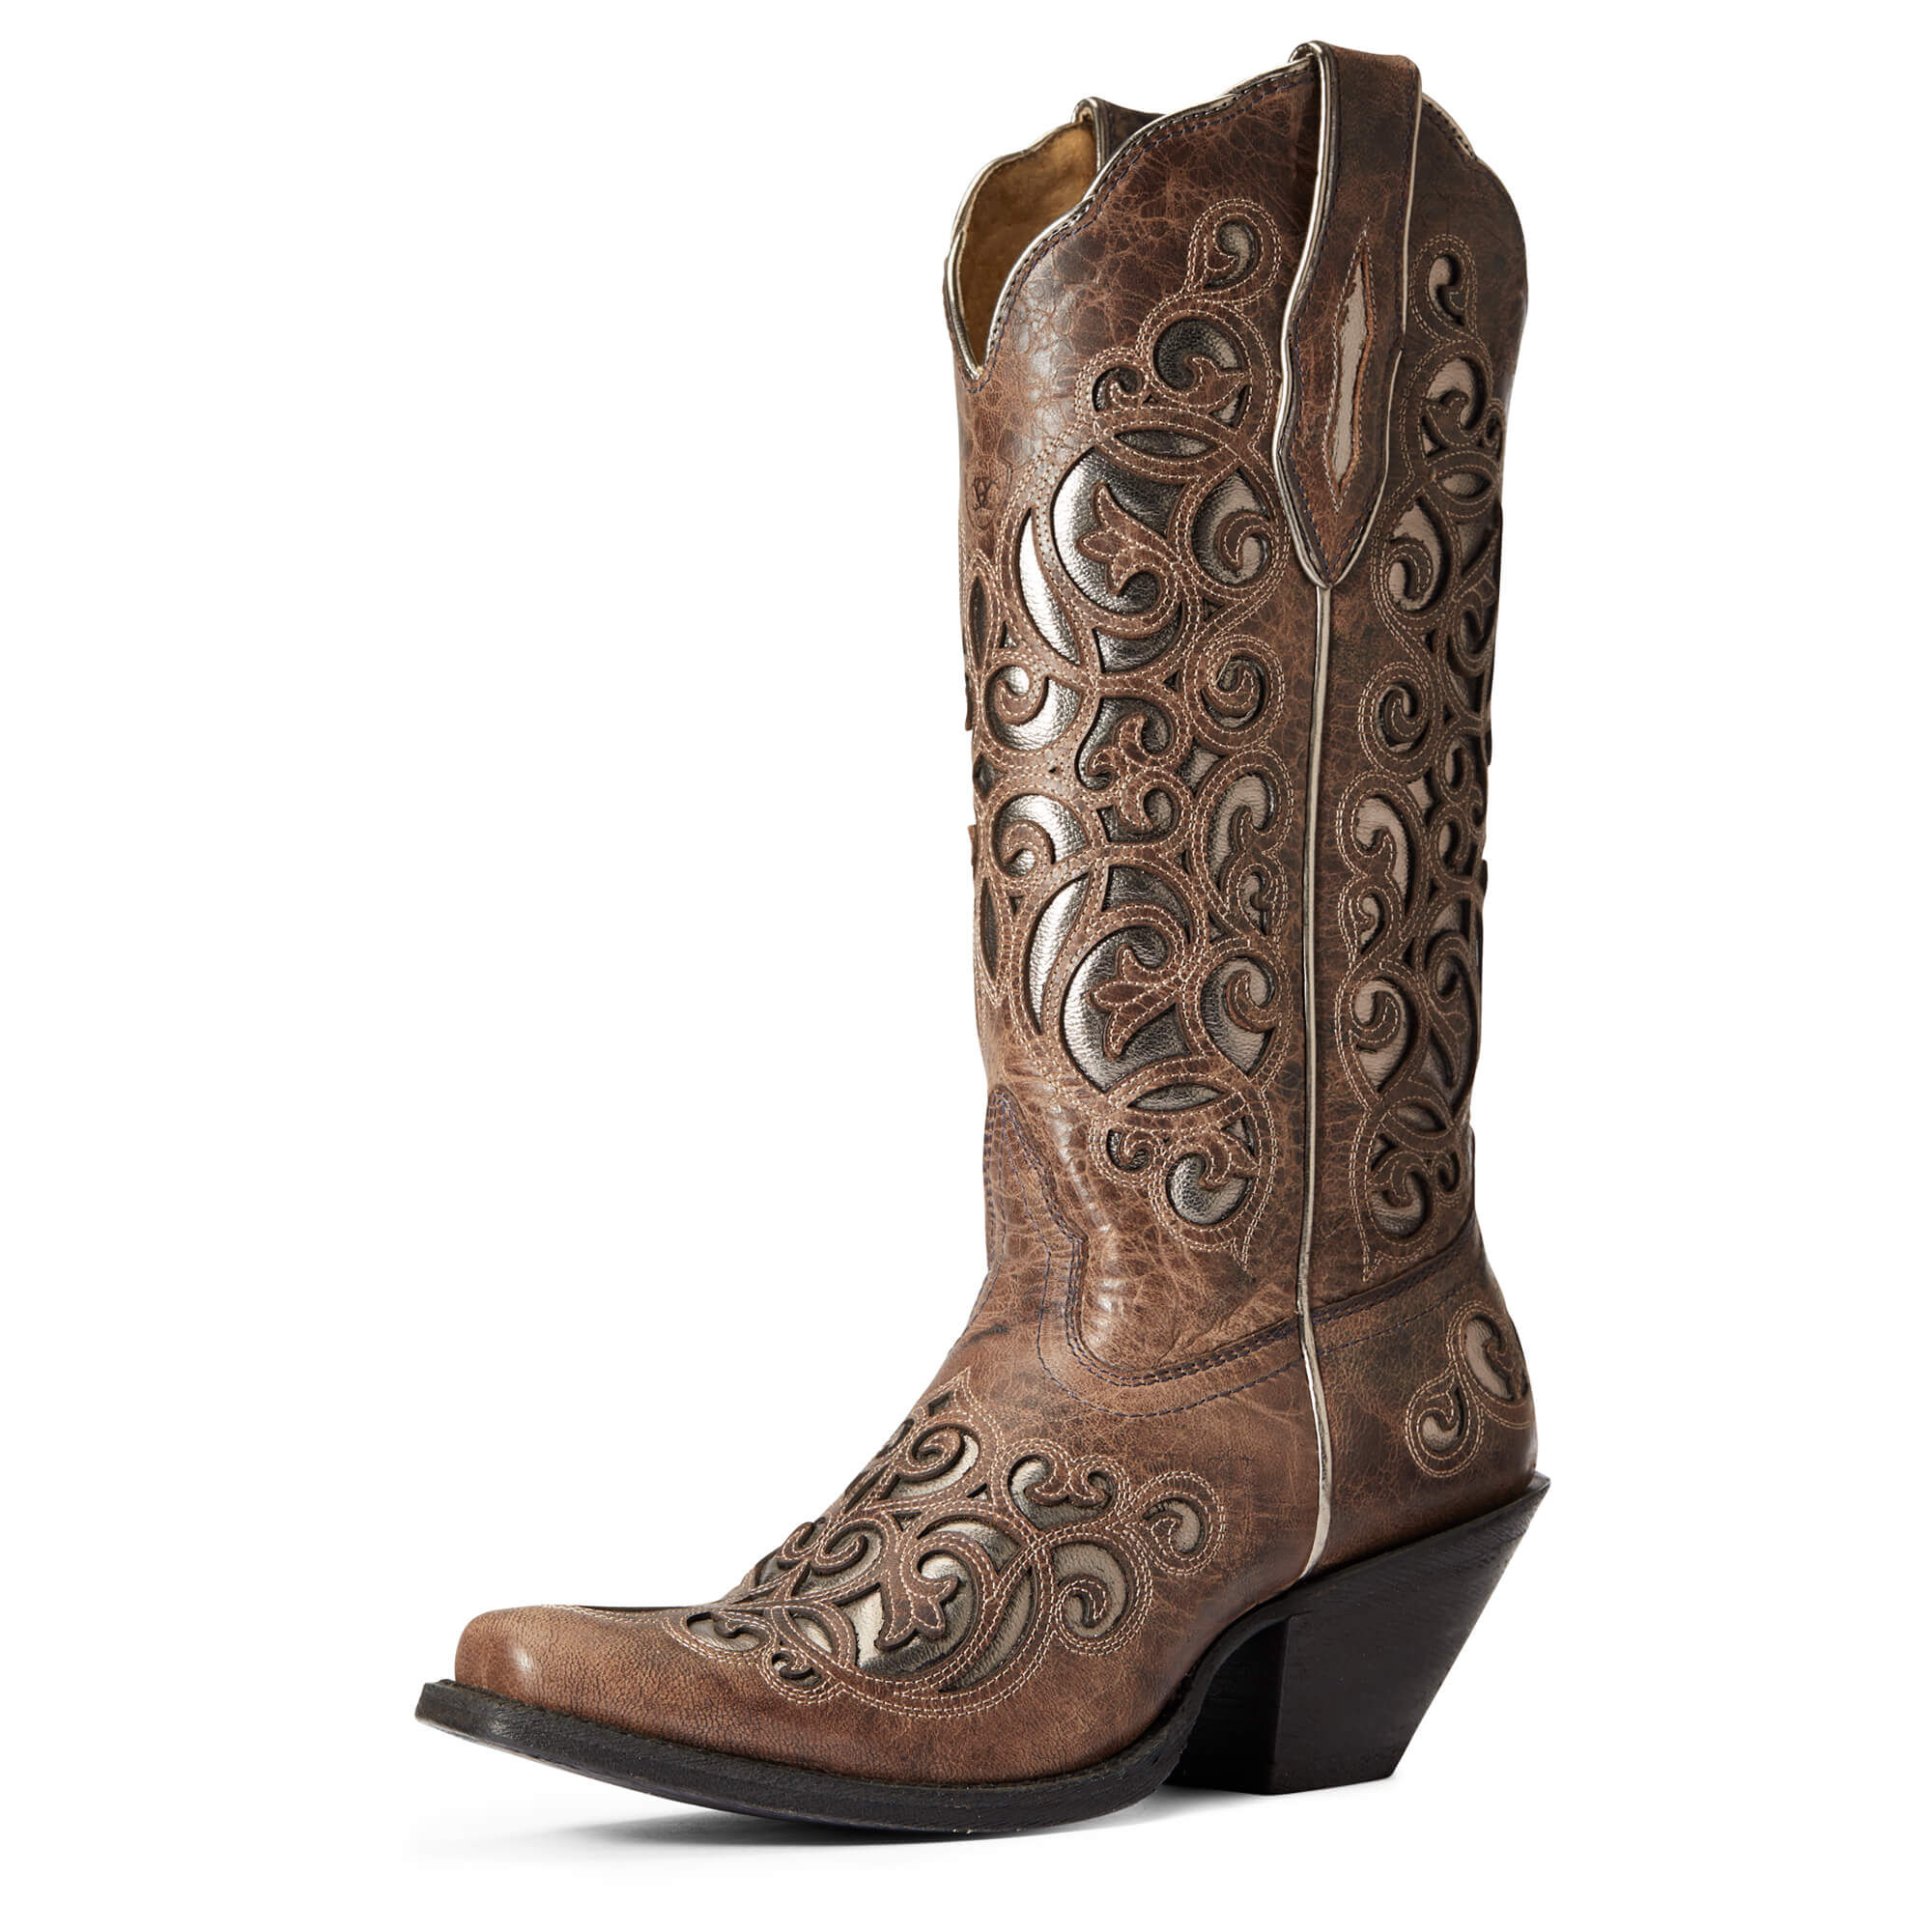 Women's Divine Western Boots in Crackled Taupe Leather  by Ariat